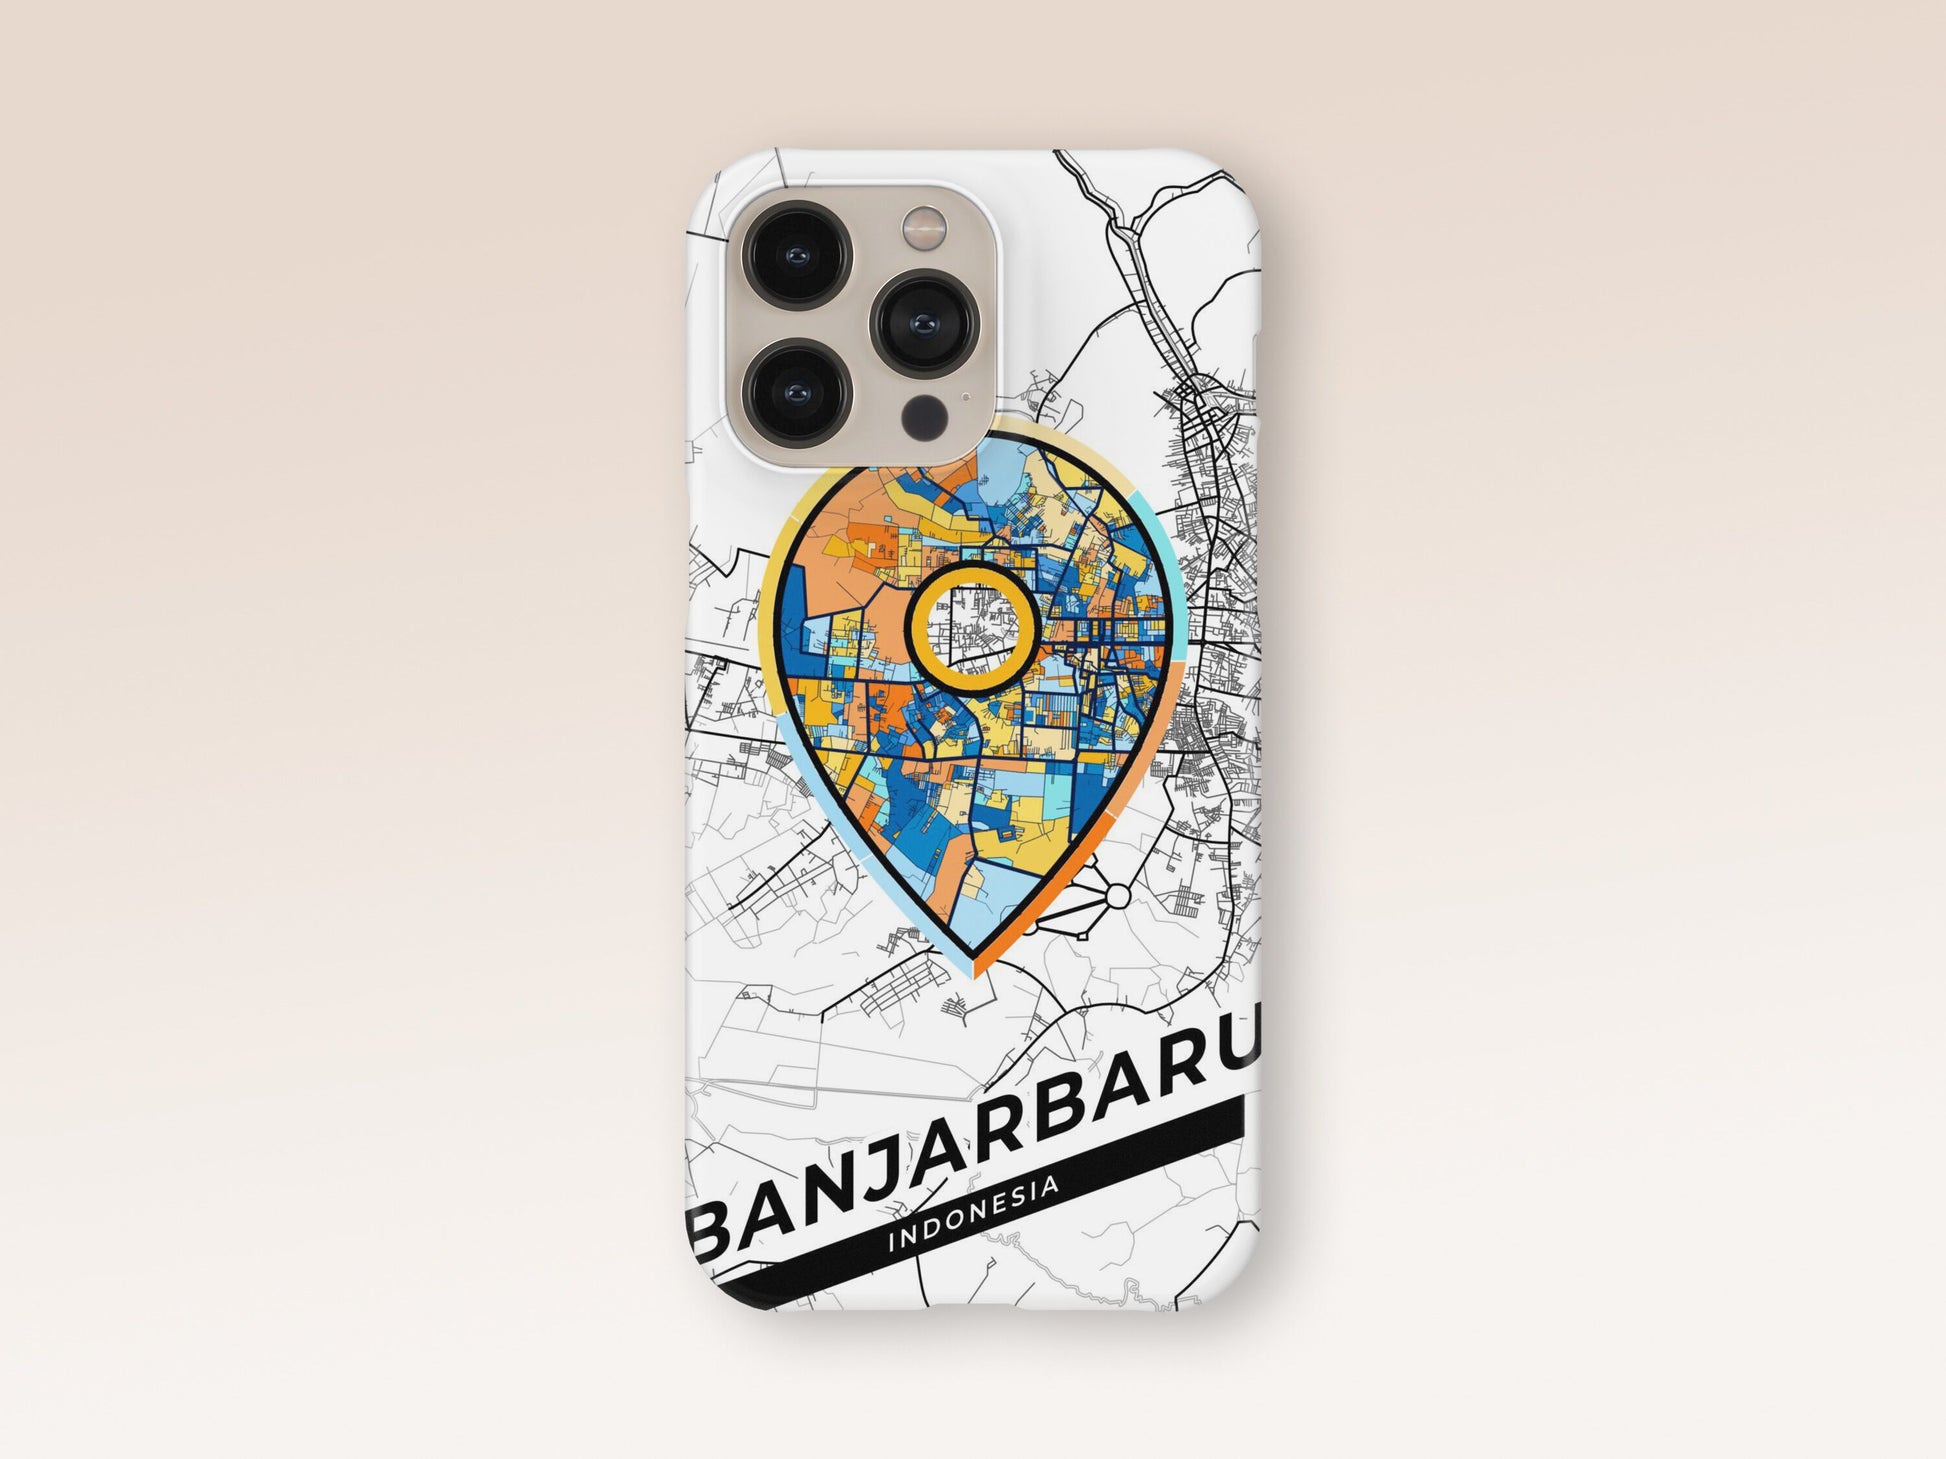 Banjarbaru Indonesia slim phone case with colorful icon. Birthday, wedding or housewarming gift. Couple match cases. 1